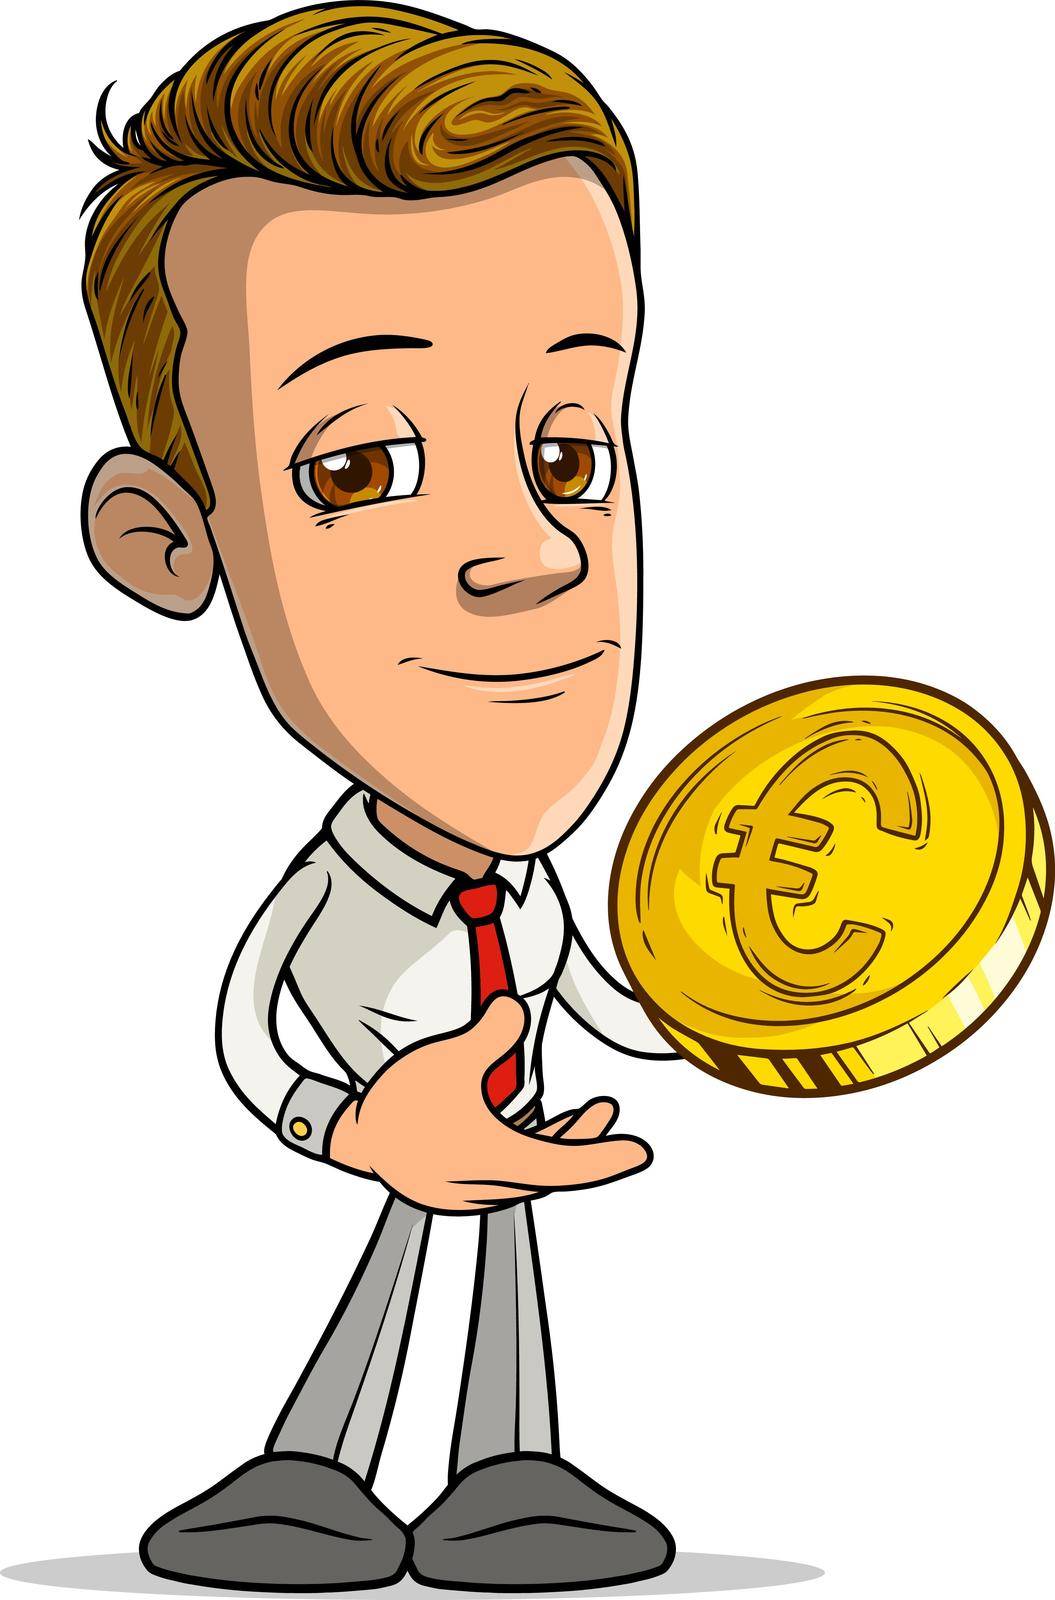 Cartoon brunette standing funny smiling boy character showing ok gesture with golden euro sign coin. Isolated on white background. Vector icon.